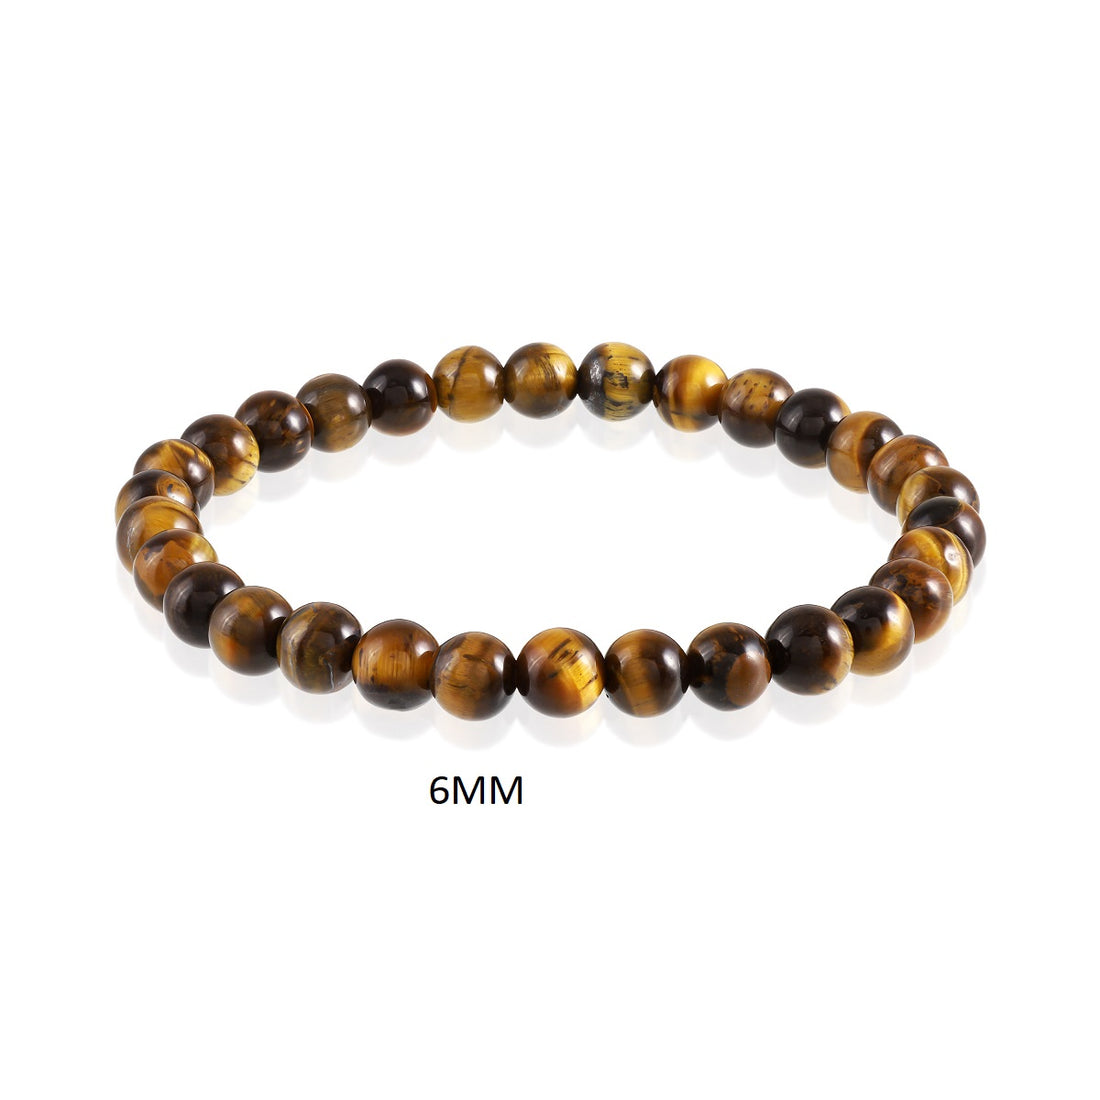 Visual representation of courage and strength associated with the Golden Tiger's Eye Bracelet, radiating positive energy and resilience